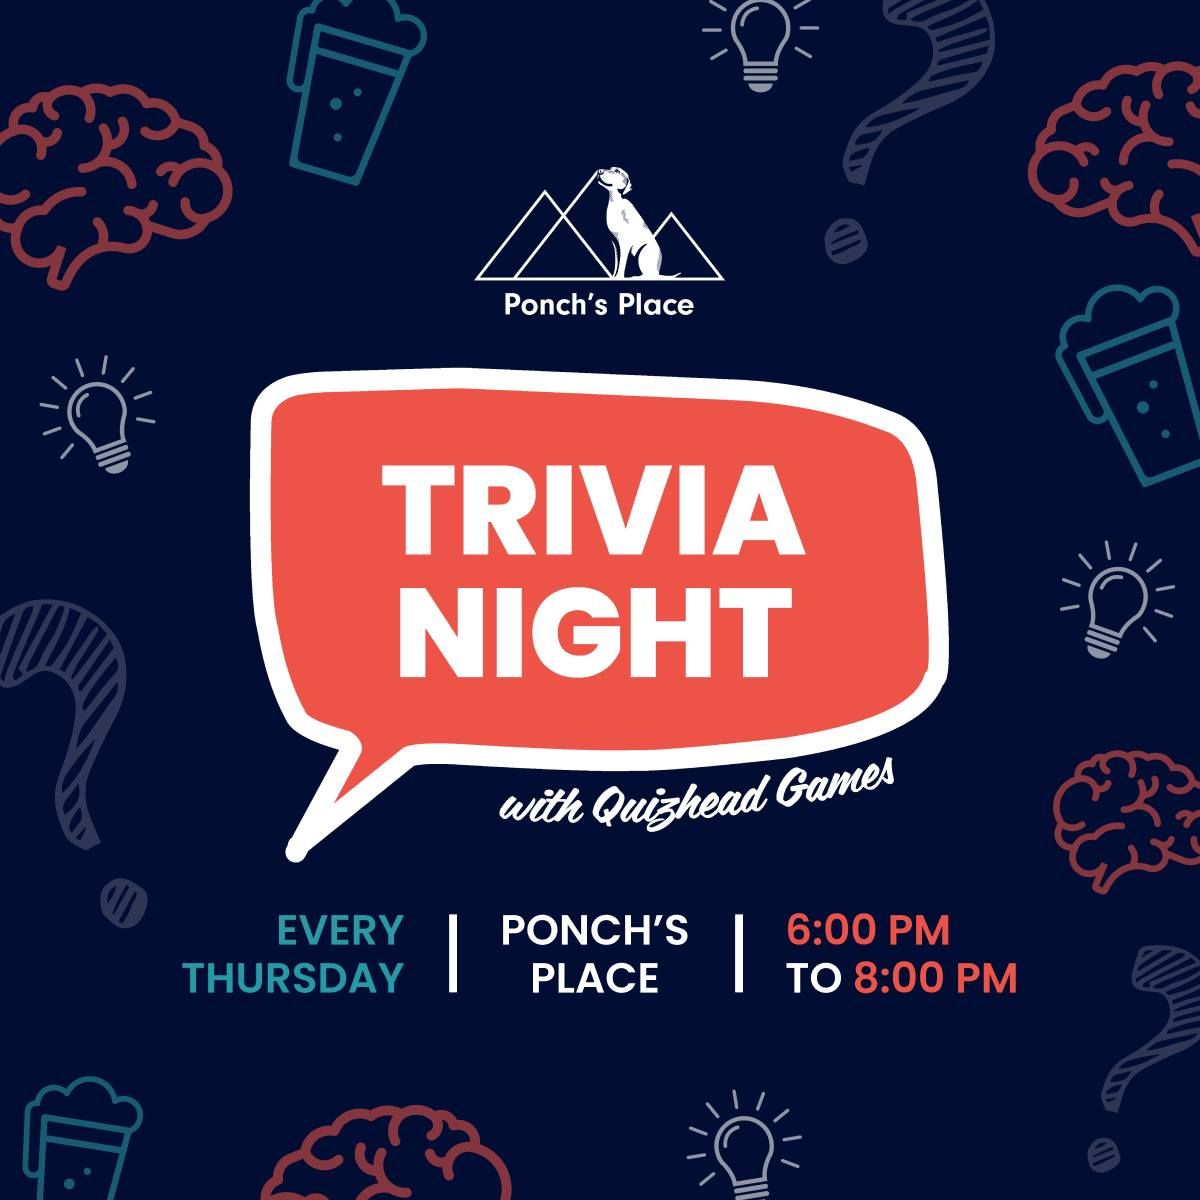 Thursday Night Trivia with Quizhead Games at Ponch's Place in Bend